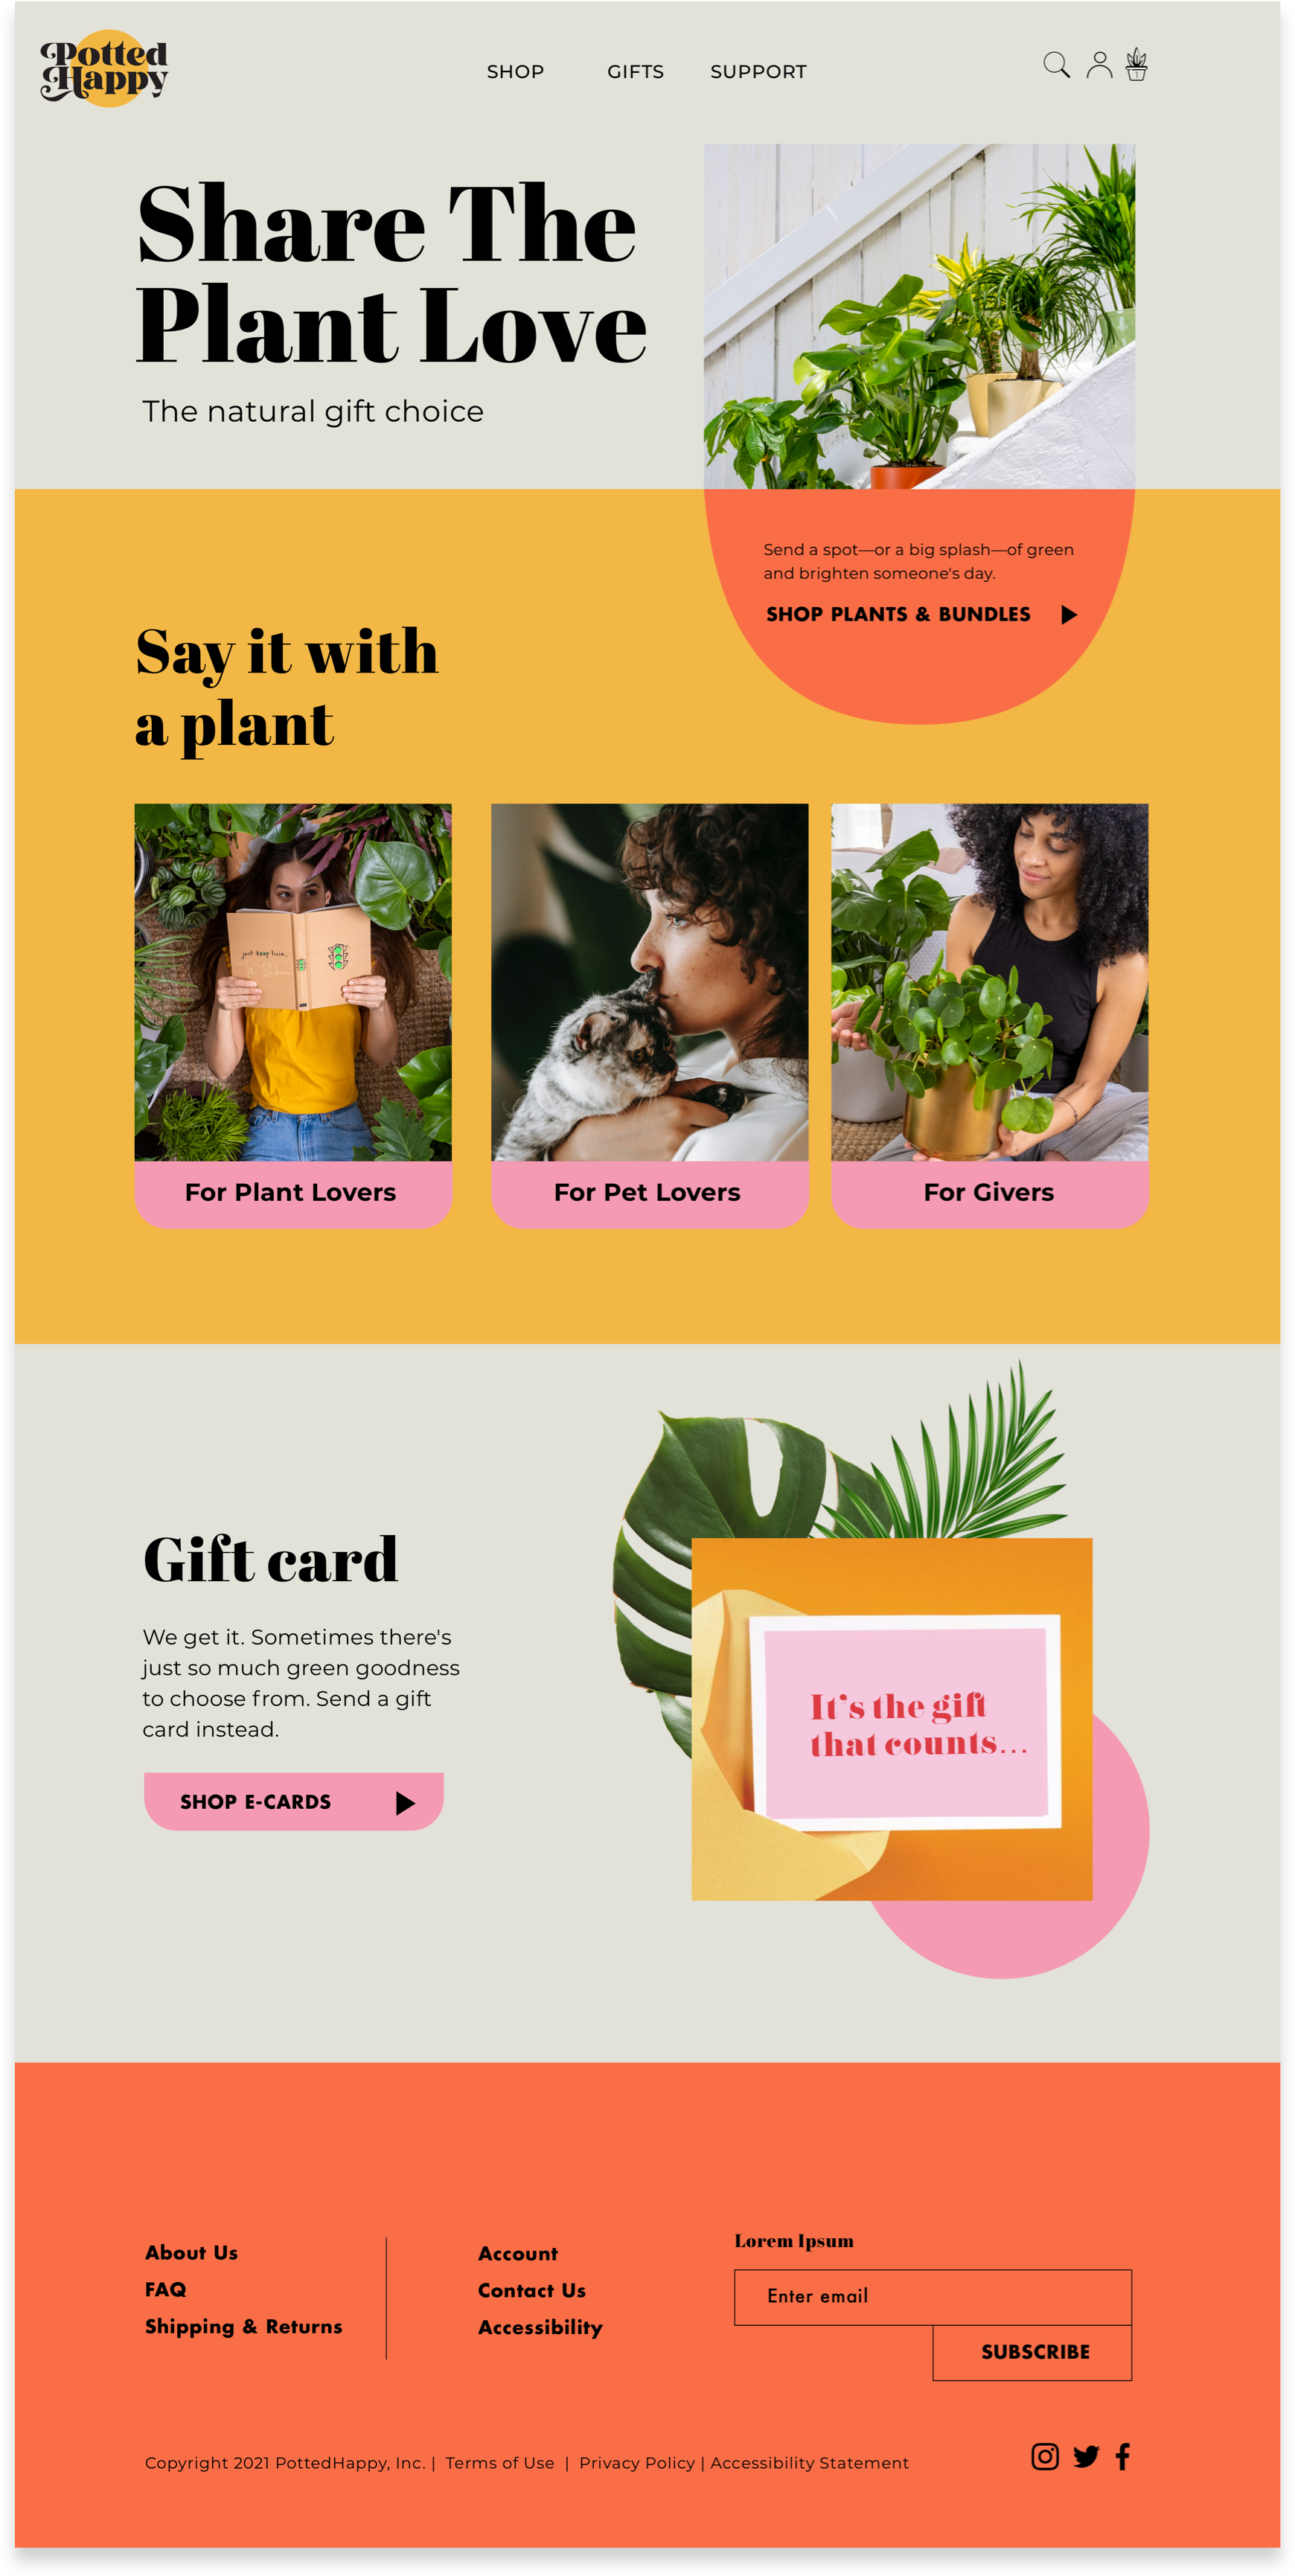 Share the plant love - Give a gift page